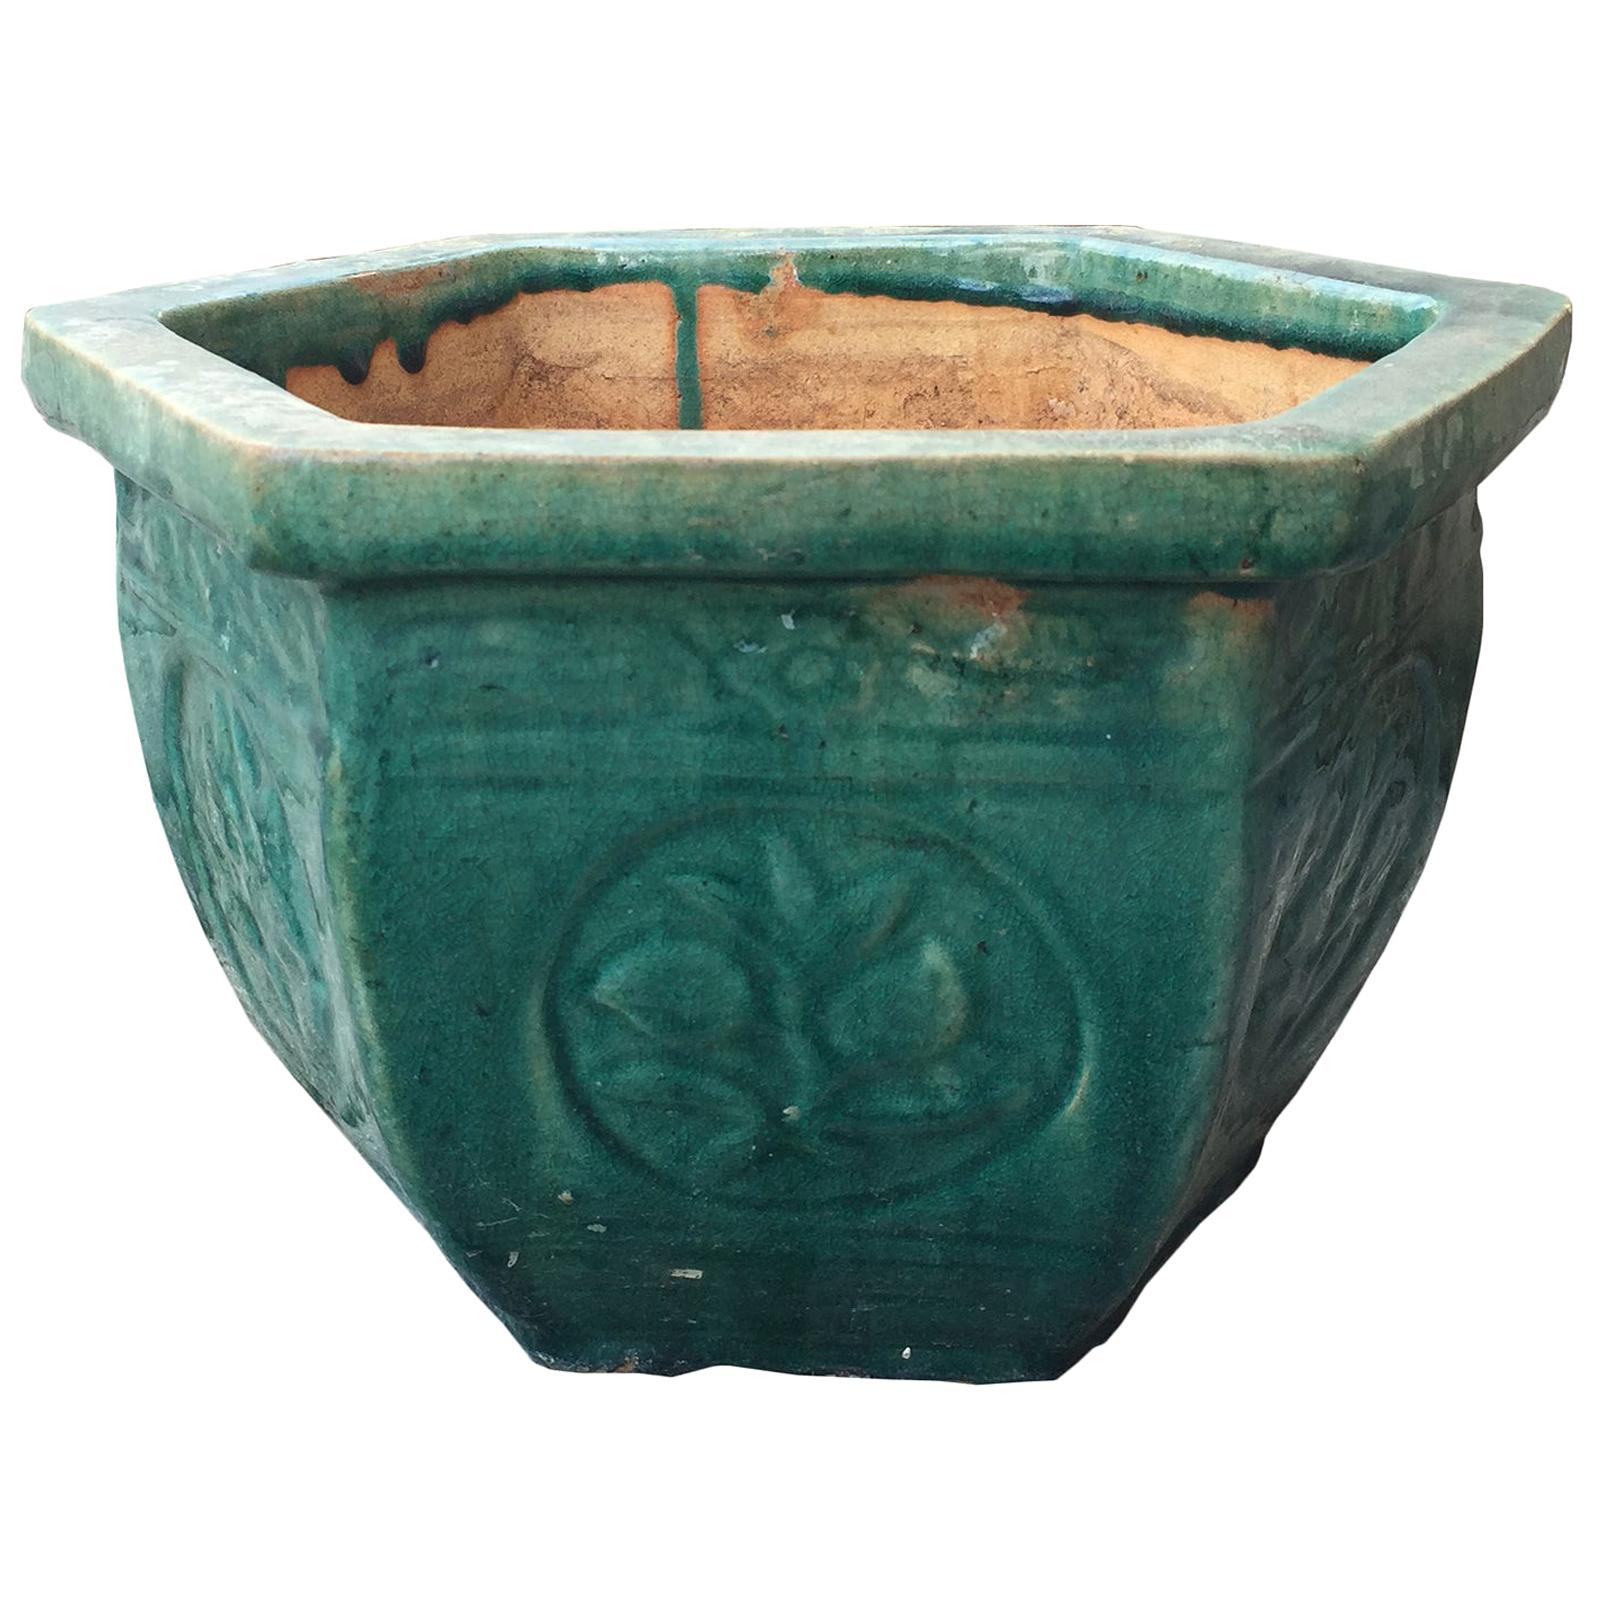 19th-20th Century Chinese Turquoise Blue Hexagonal Pottery Cachepot Planter